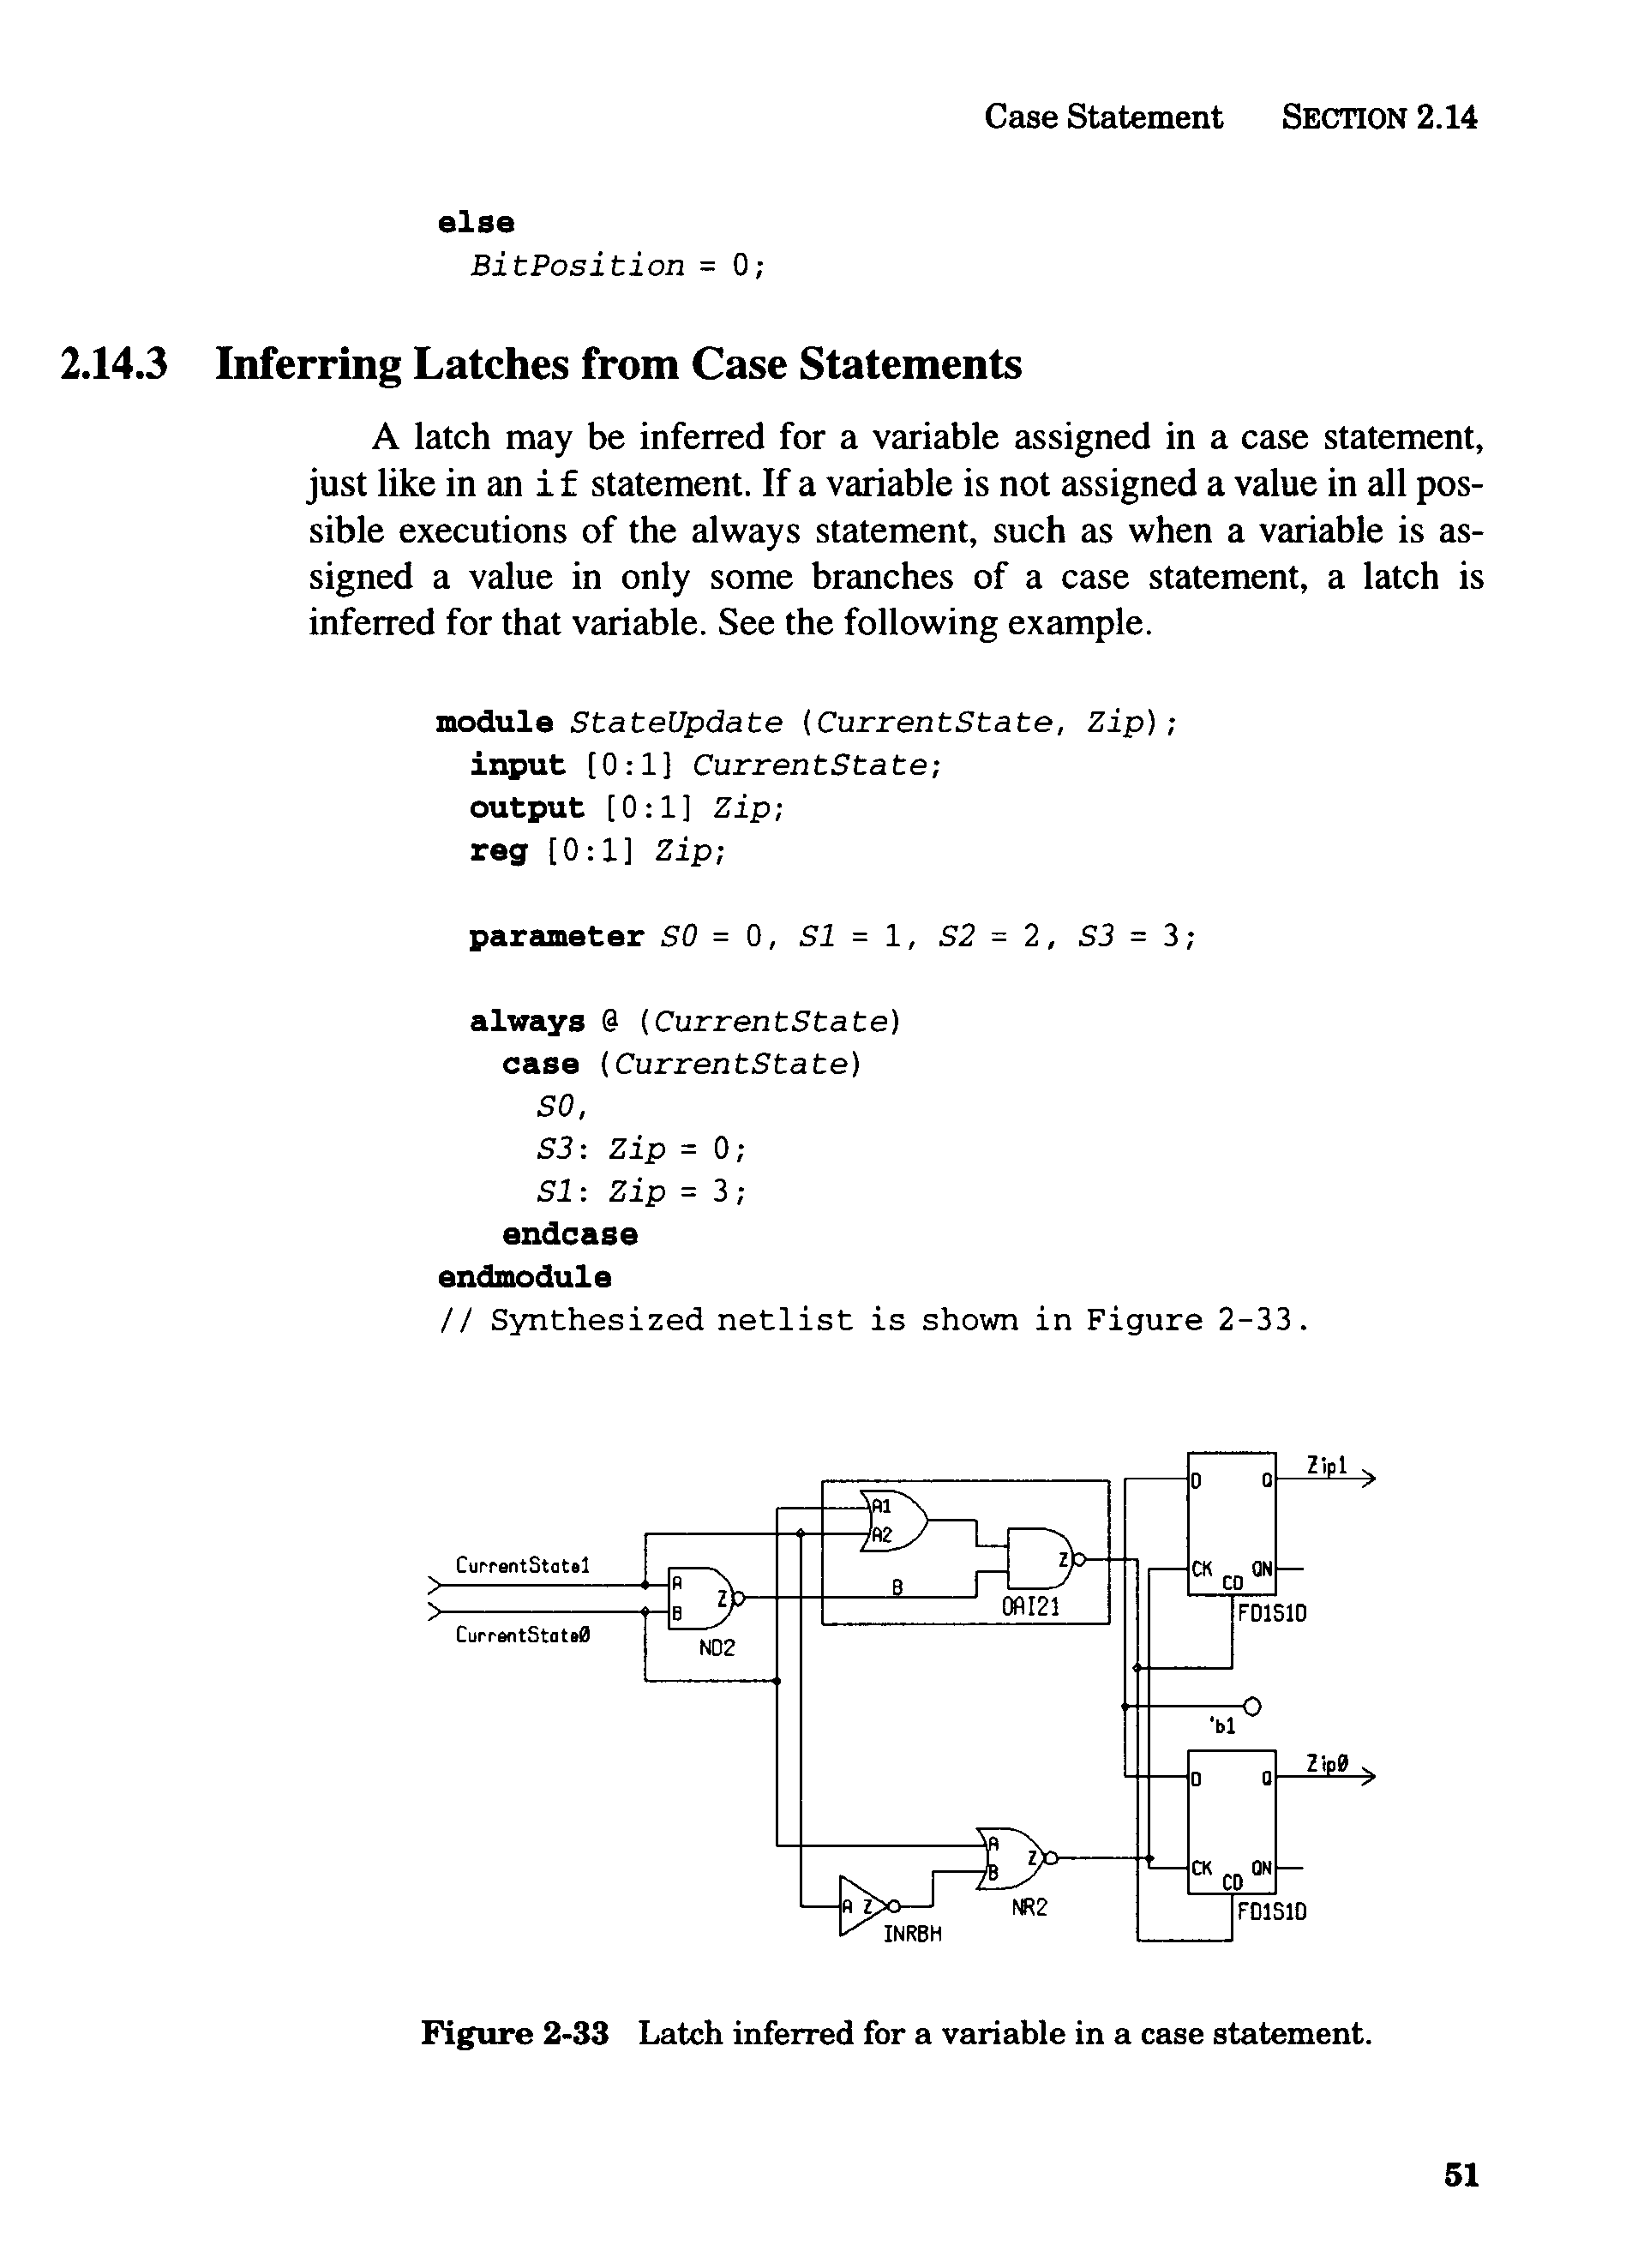 Figure 2-33 Latch inferred for a variable in a case statement.